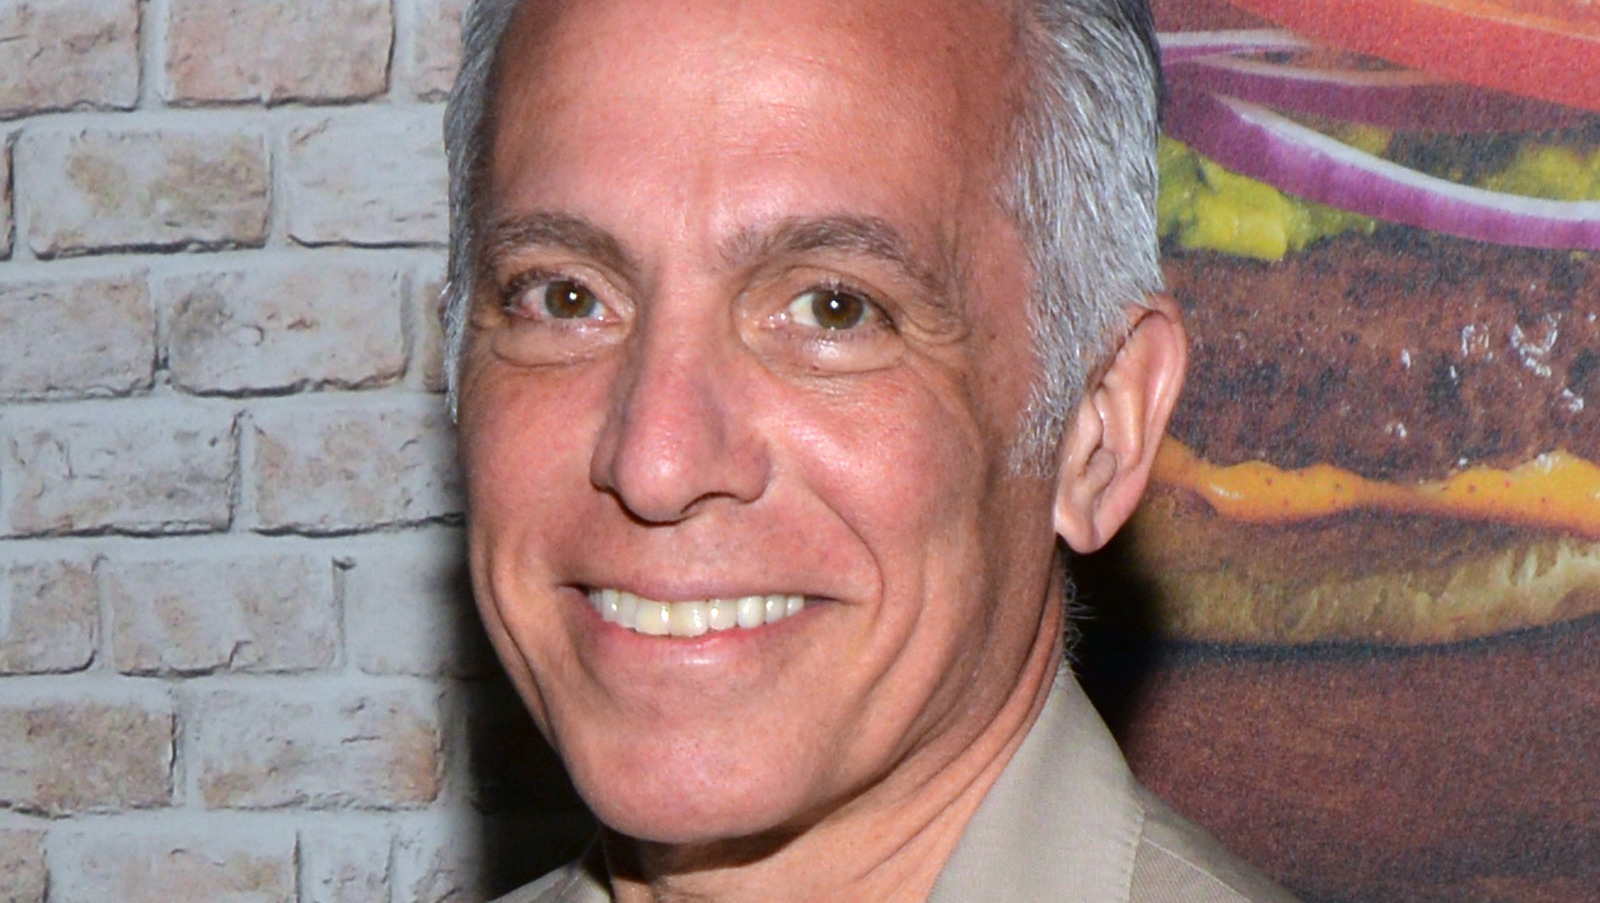 https://www.mashed.com/img/gallery/this-is-how-much-geoffrey-zakarian-is-really-worth/l-intro-1615995590.jpg